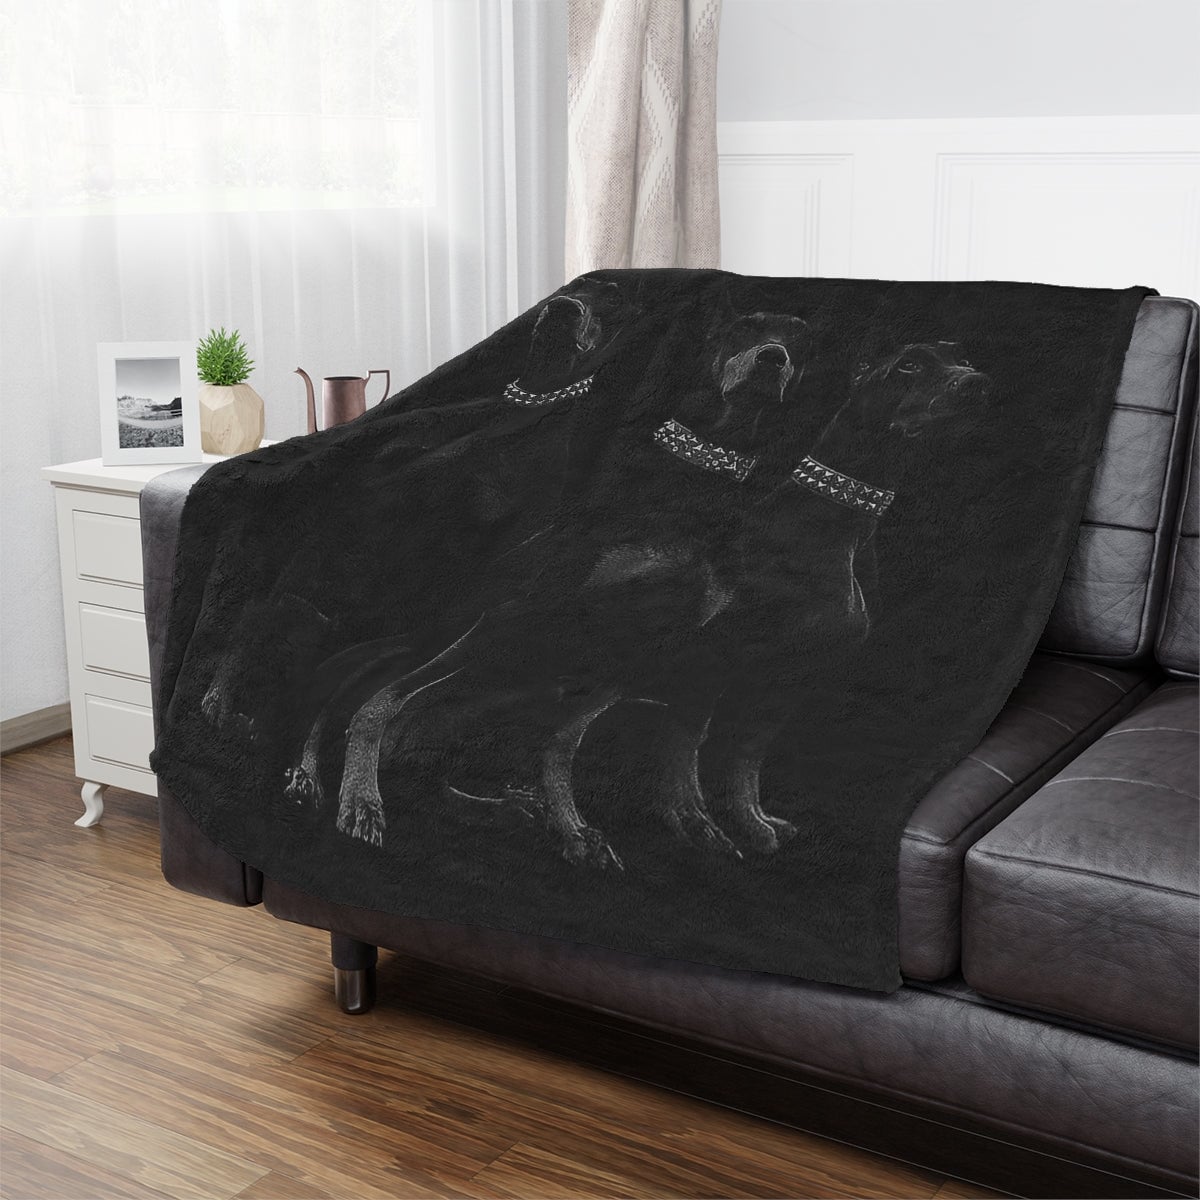 Stylish Minky Blanket featuring artistic renditions of Dobermans in a gangster theme.